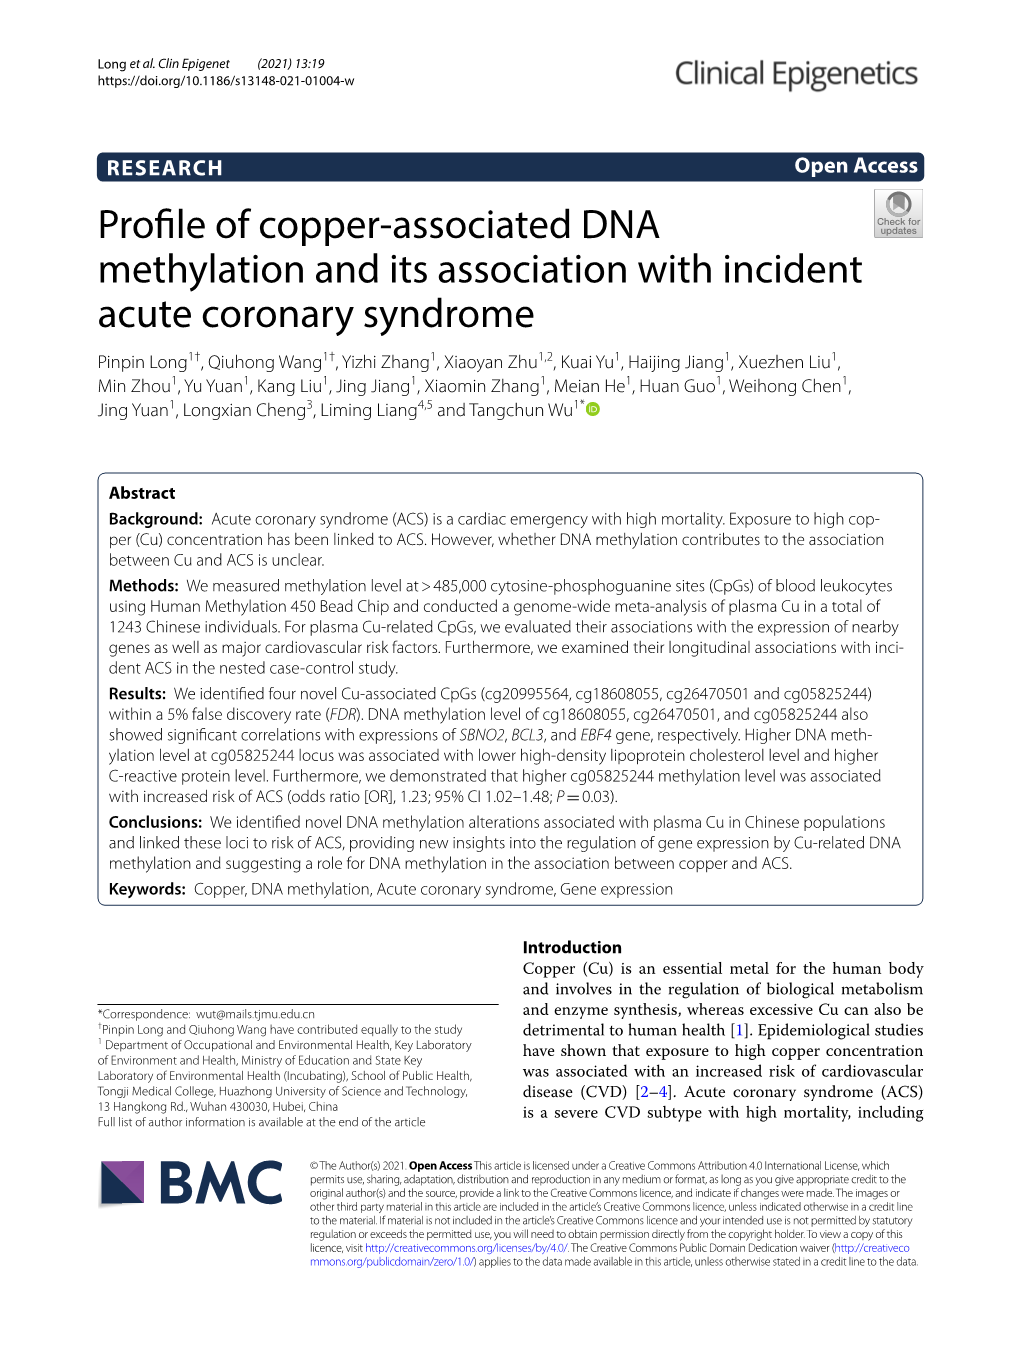 Profile of Copper-Associated DNA Methylation and Its Association With